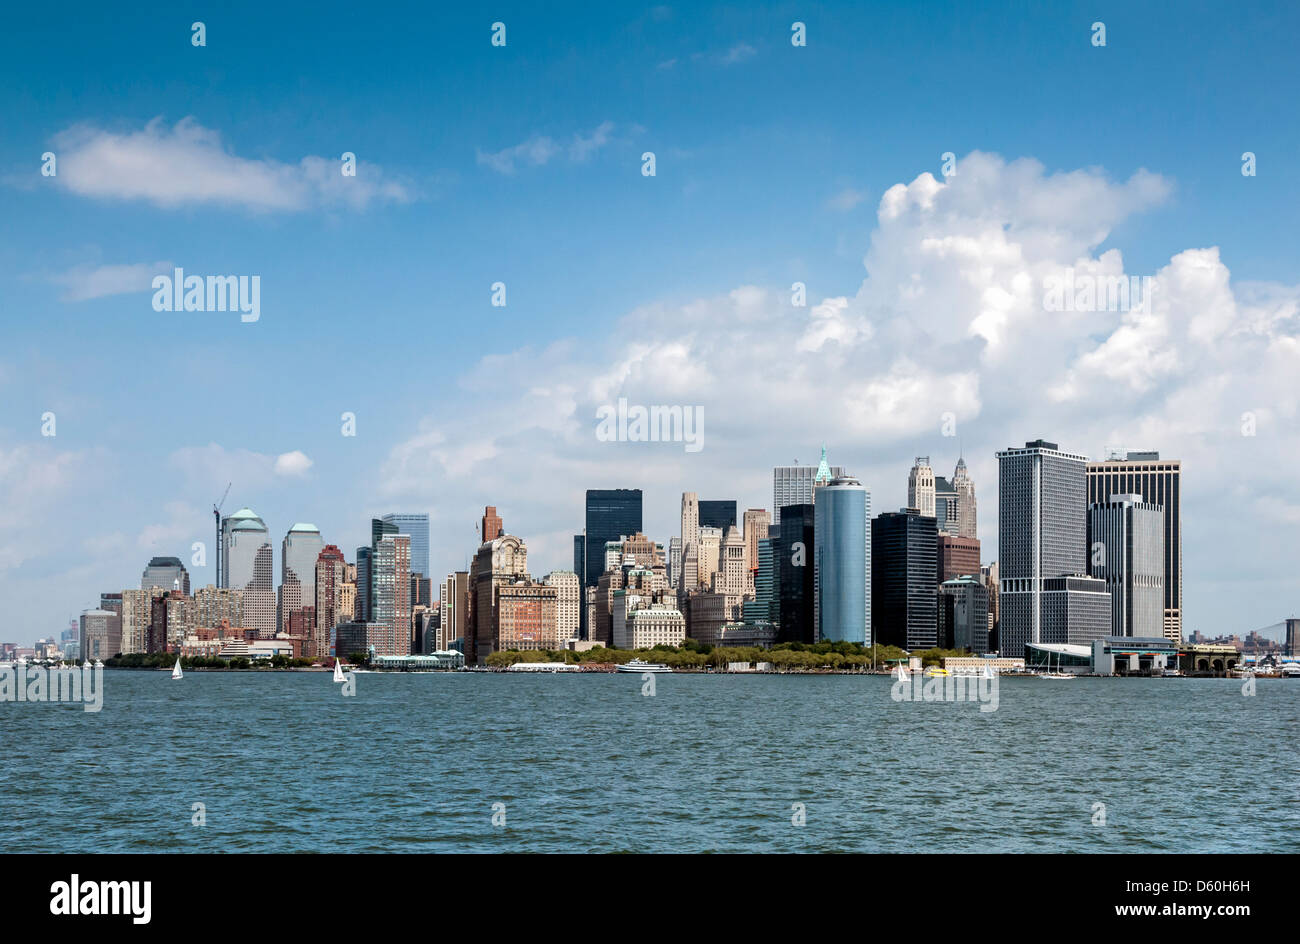 Downtown Manhattan Skyline without the former World Trade Center across Hudson river, New York City Stock Photo